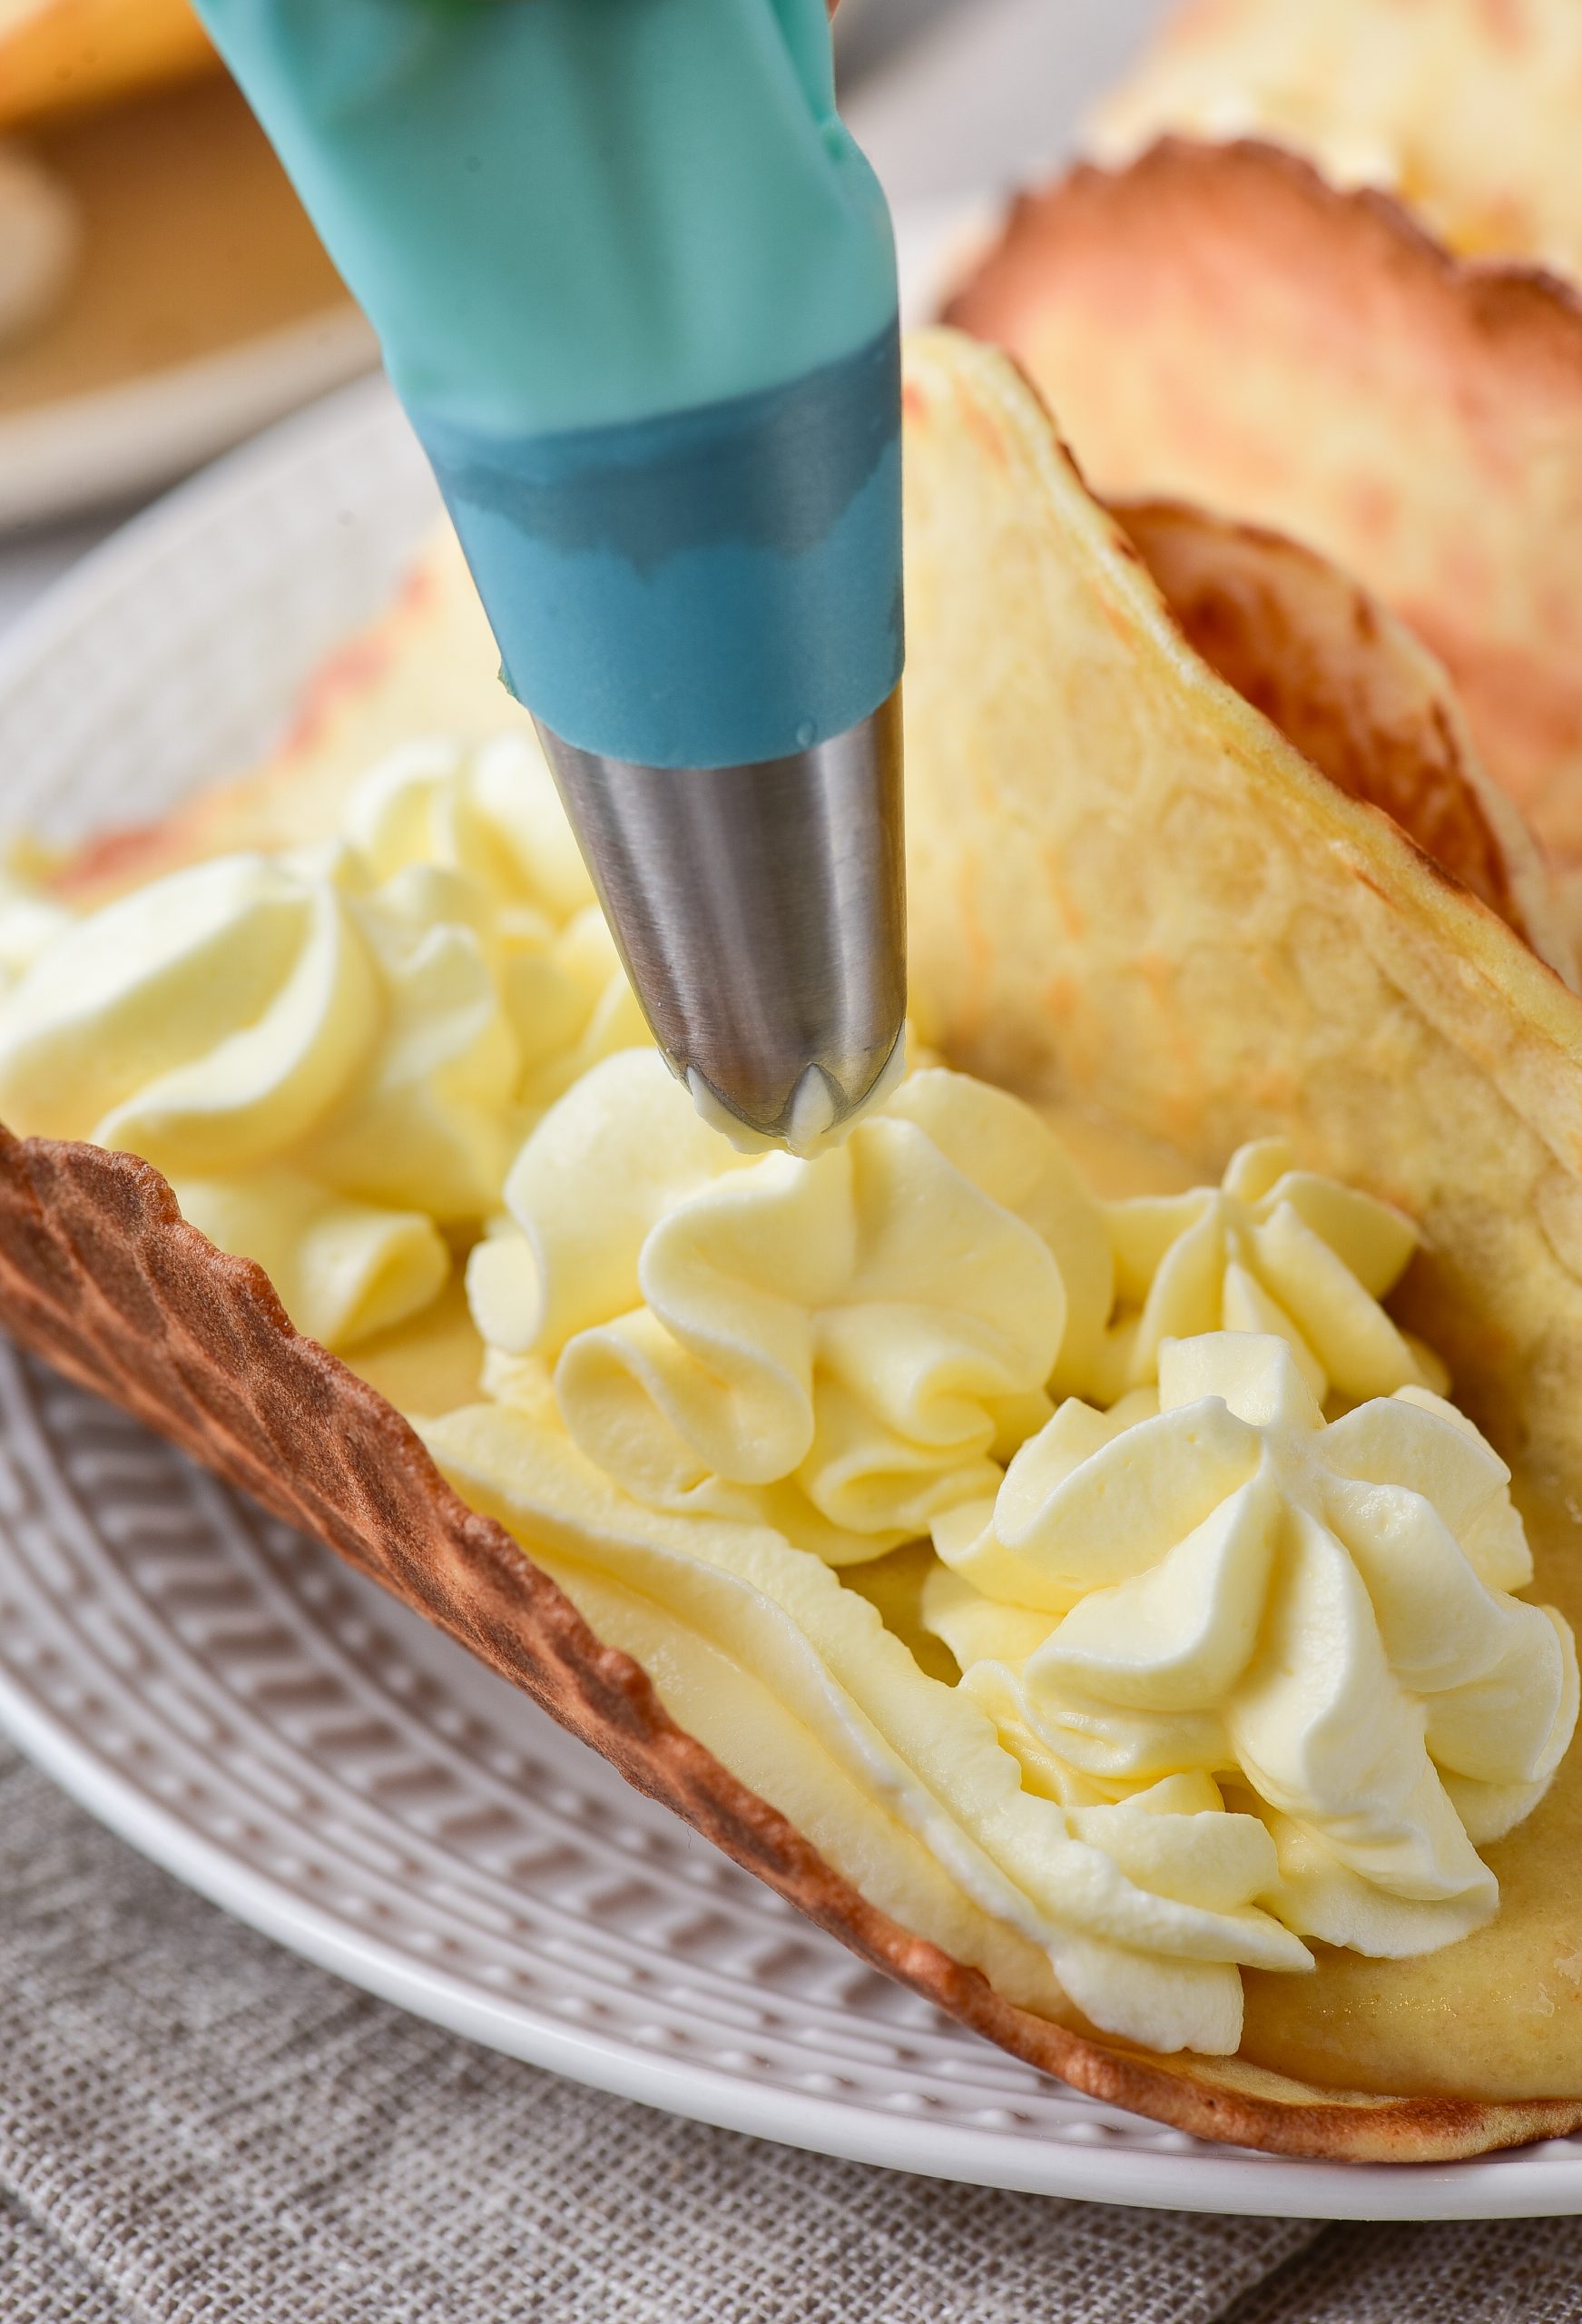 Spread an equal amount of the whipped topping onto each taco.